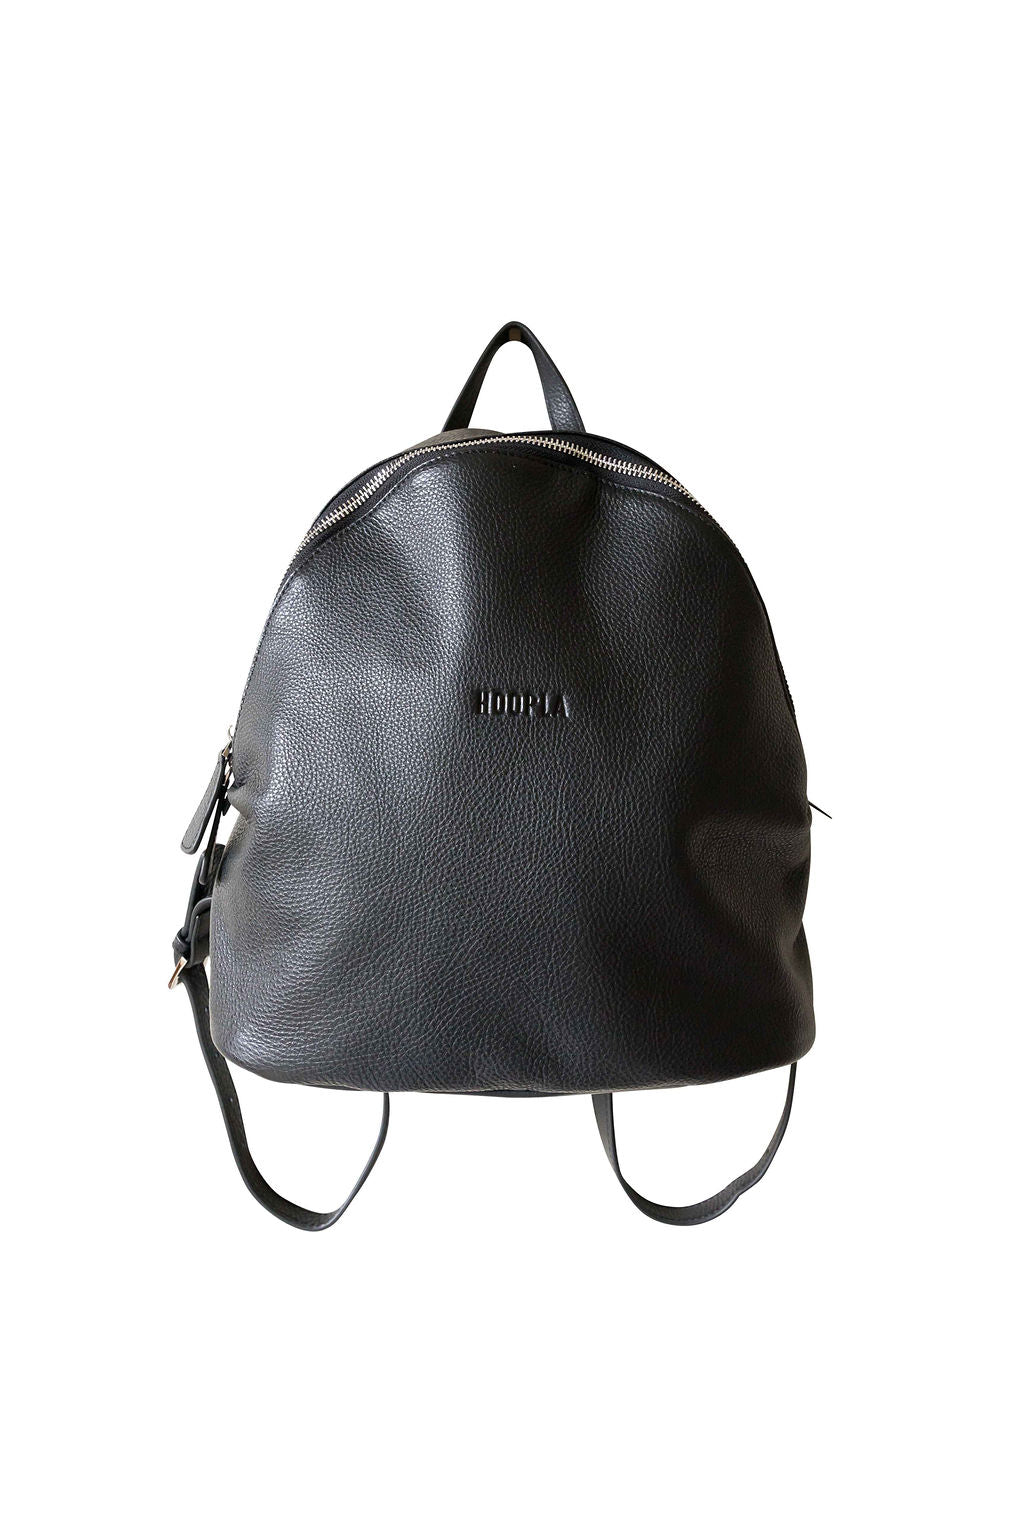 Front view of black, pebbled leather, hoopla backpack. Showing double zips with leather zip tags and small handle on top of pack for ease of carrying. 